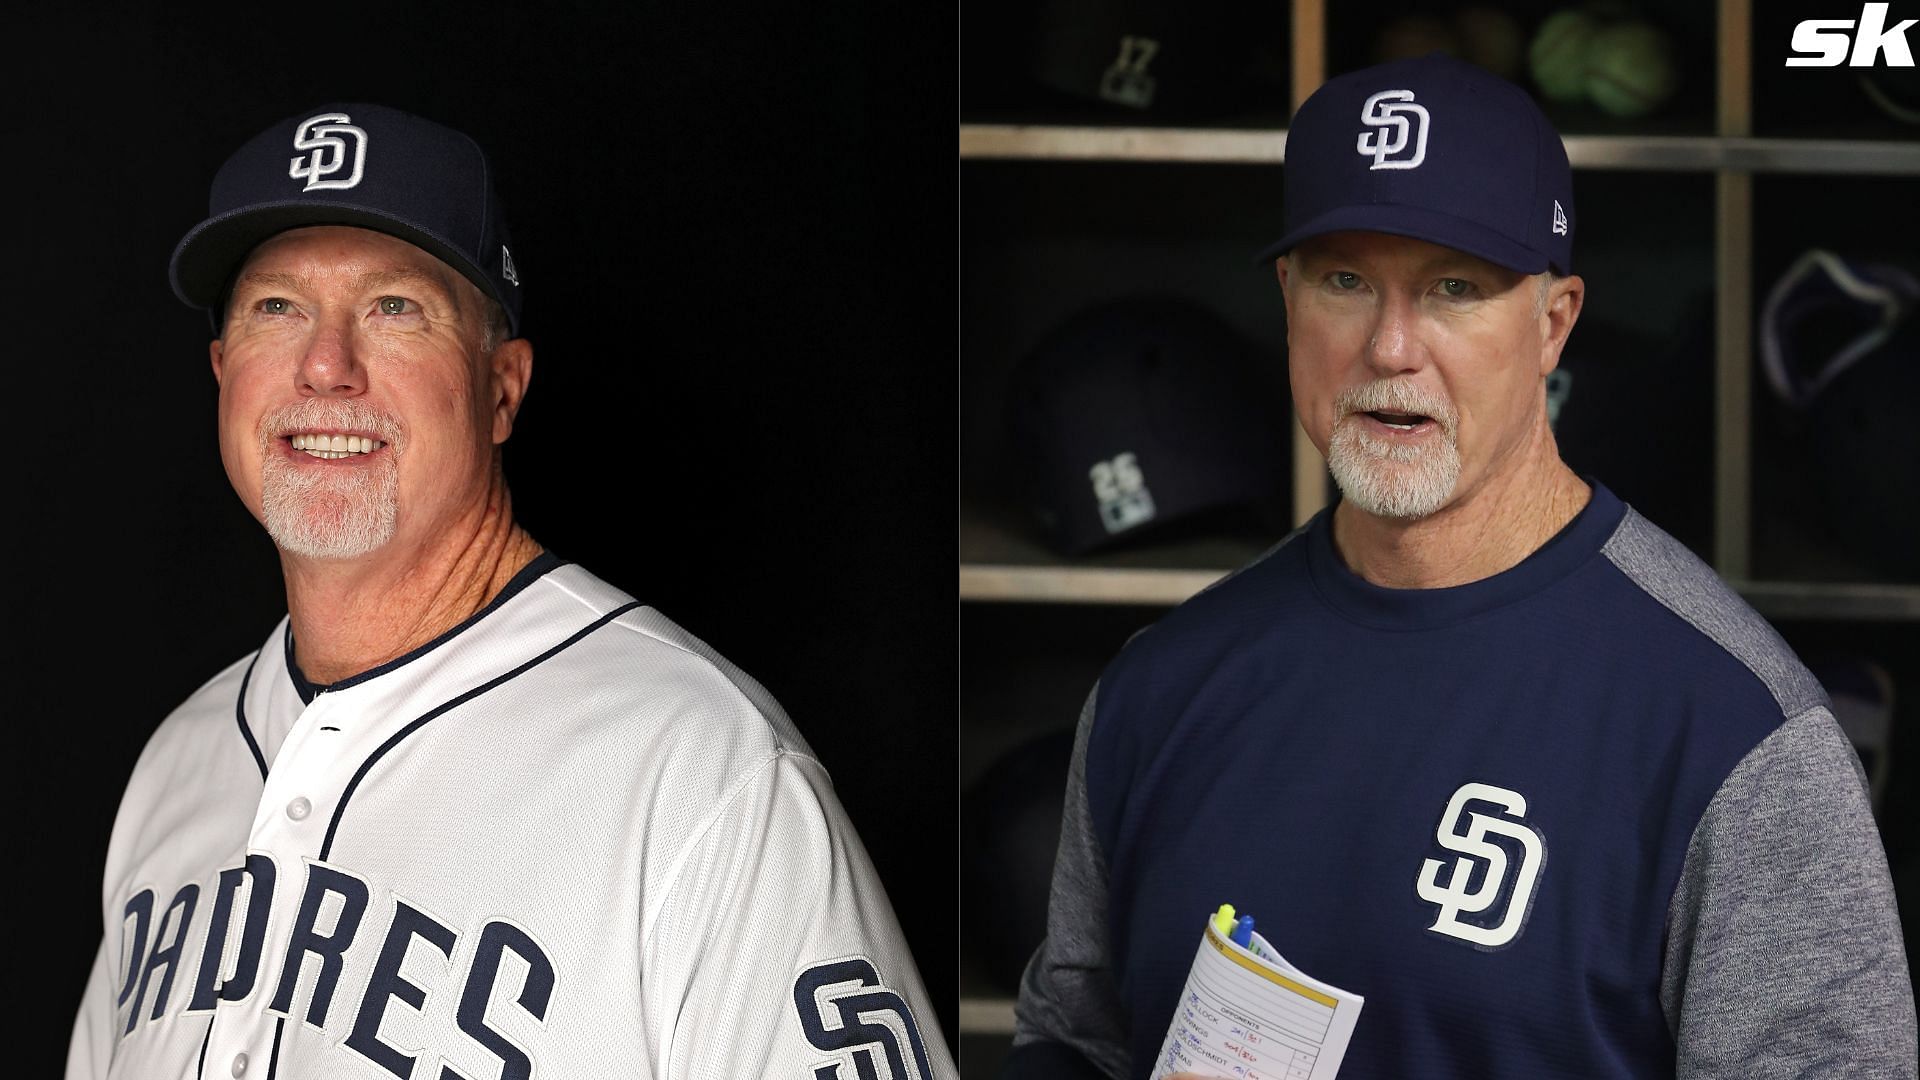 Former MLB legend Mark McGwire defends the Steroid Era and apologizes for partaking in it